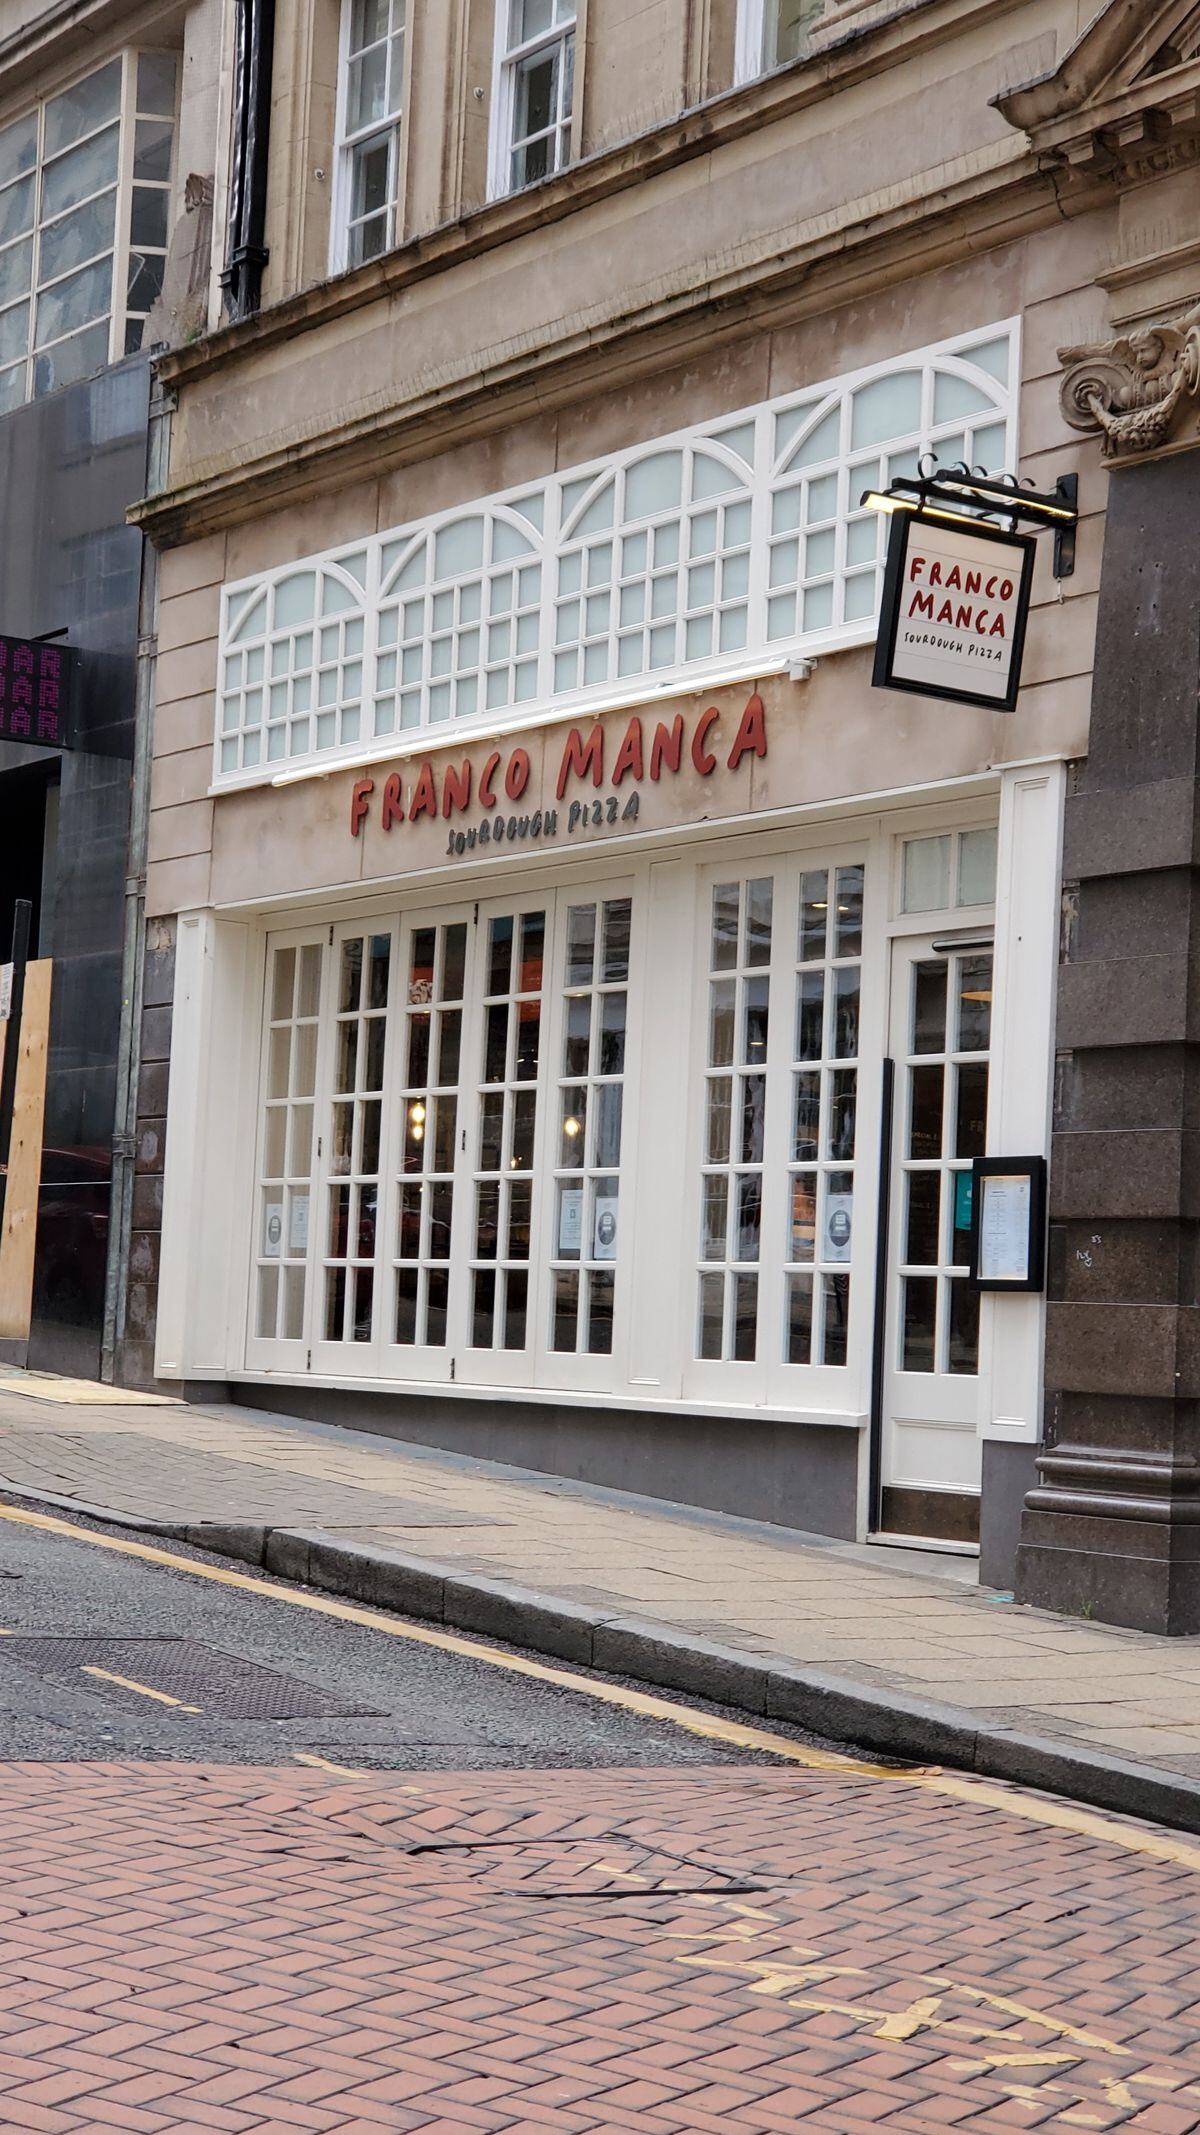 In terms of Covid-19 compliance, Franco Manca smashes it out of the park